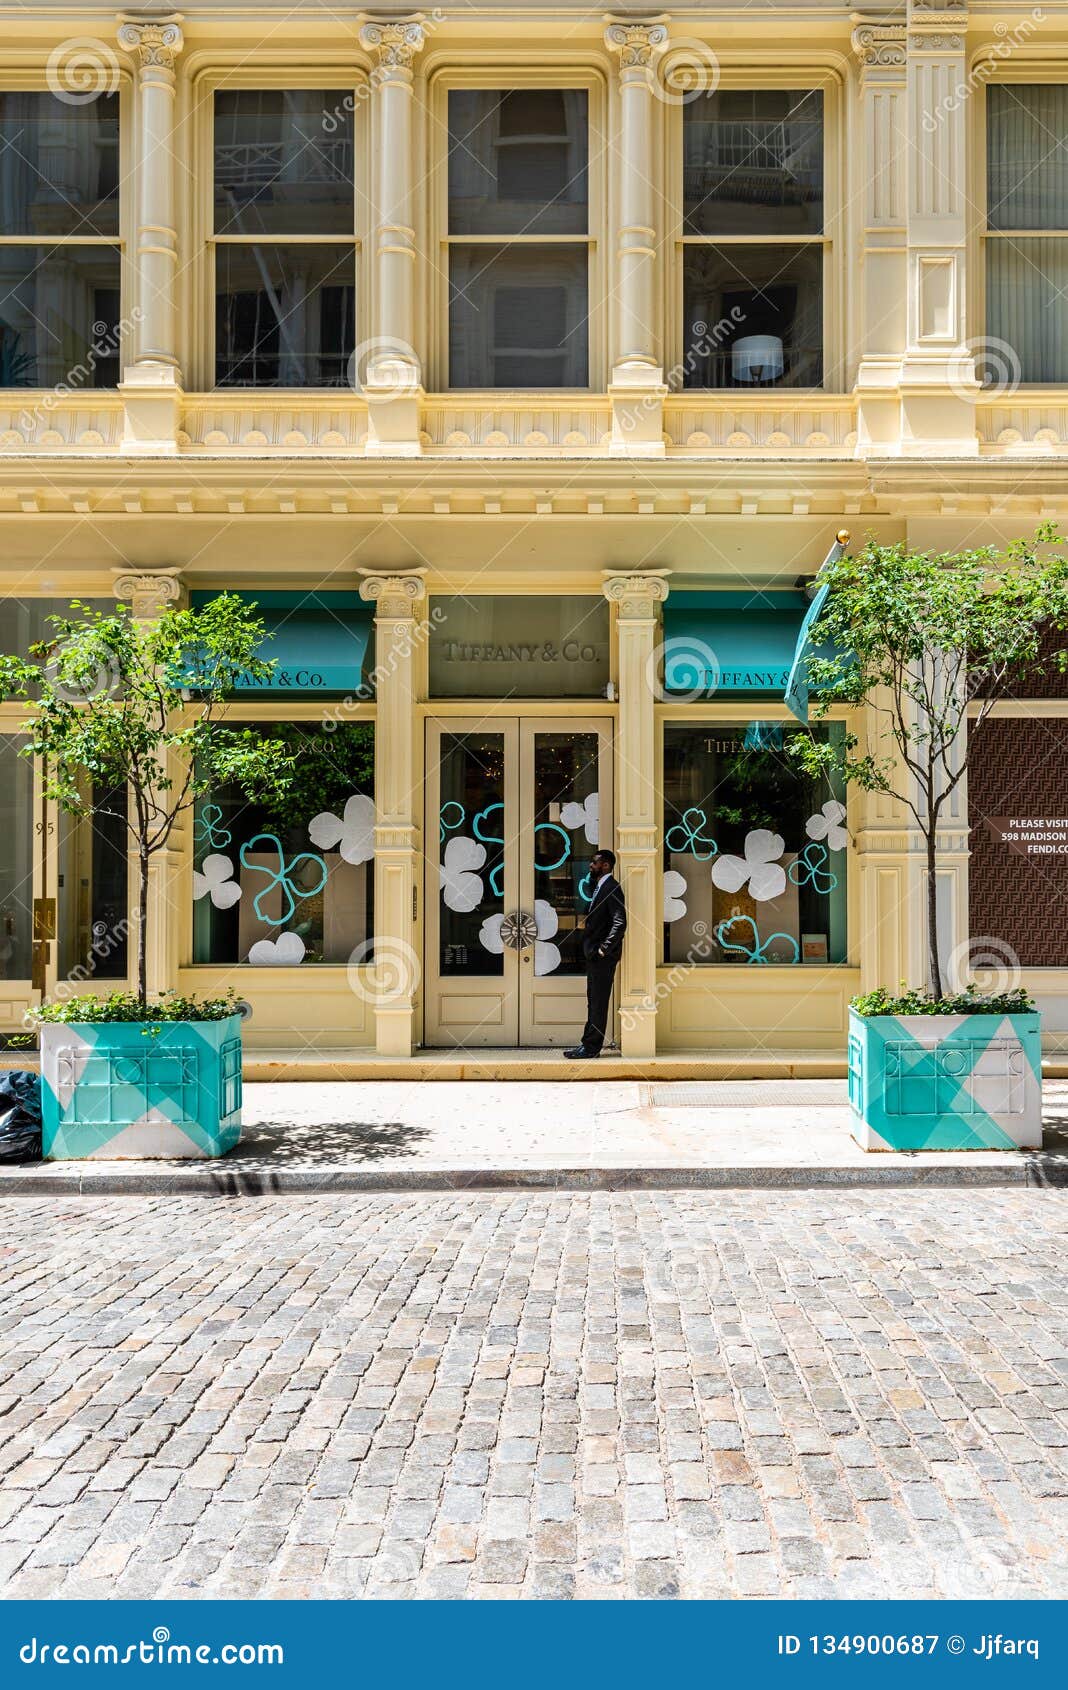 Luxury Jewelry Storefront In Soho In New York Editorial Photography - Image of facade, exterior ...